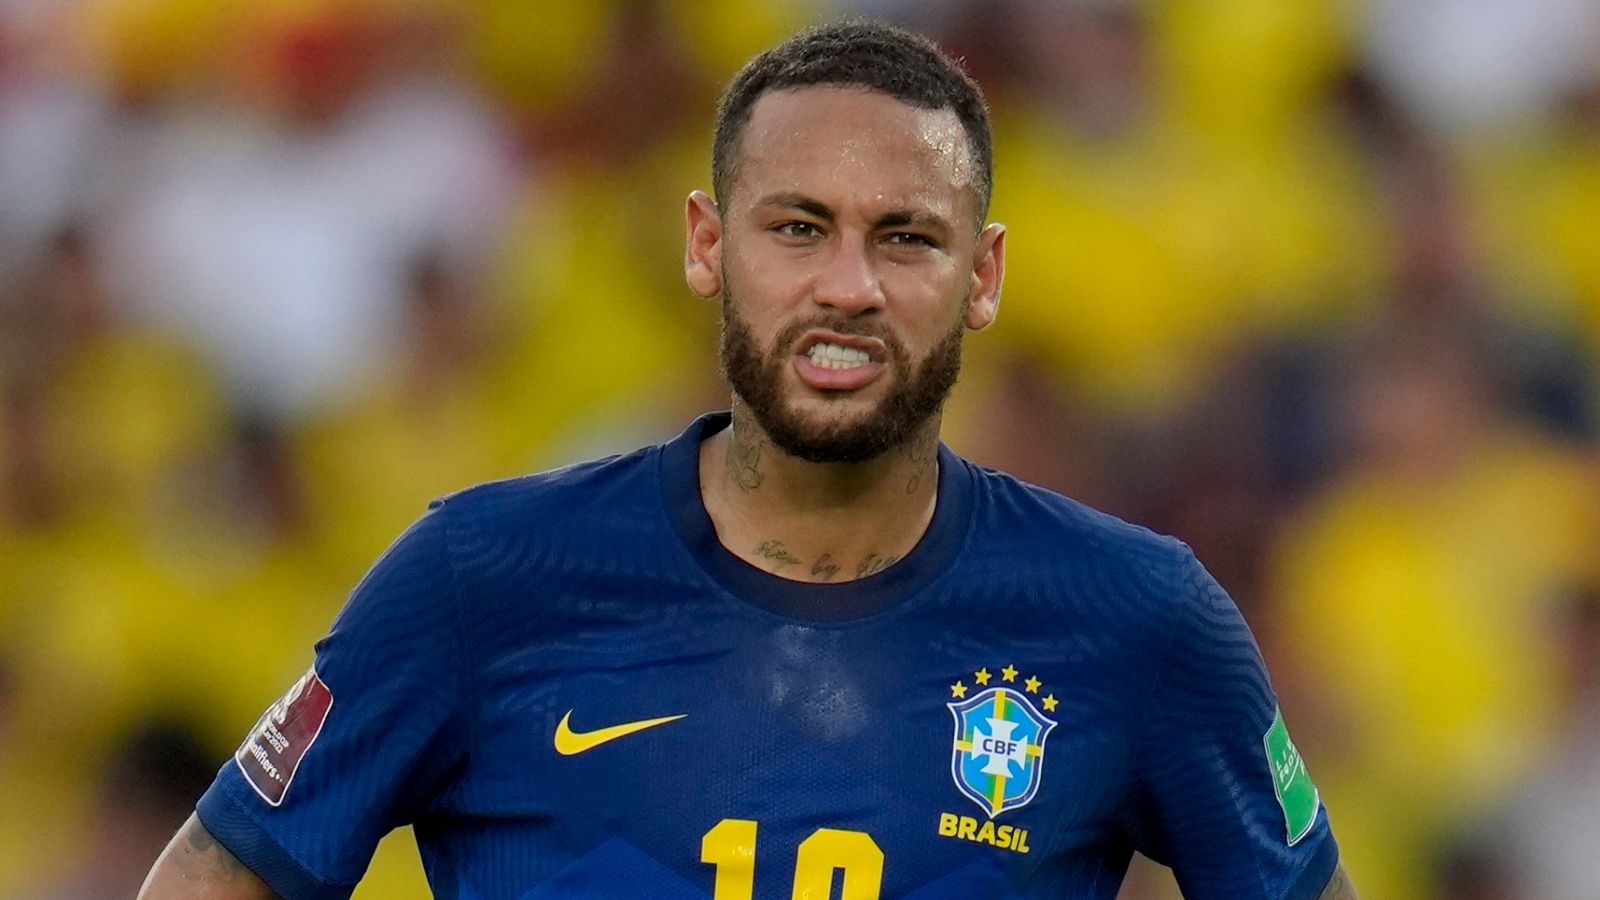 Neymar: Brazil forward believes 2022 World Cup will be the last of his career